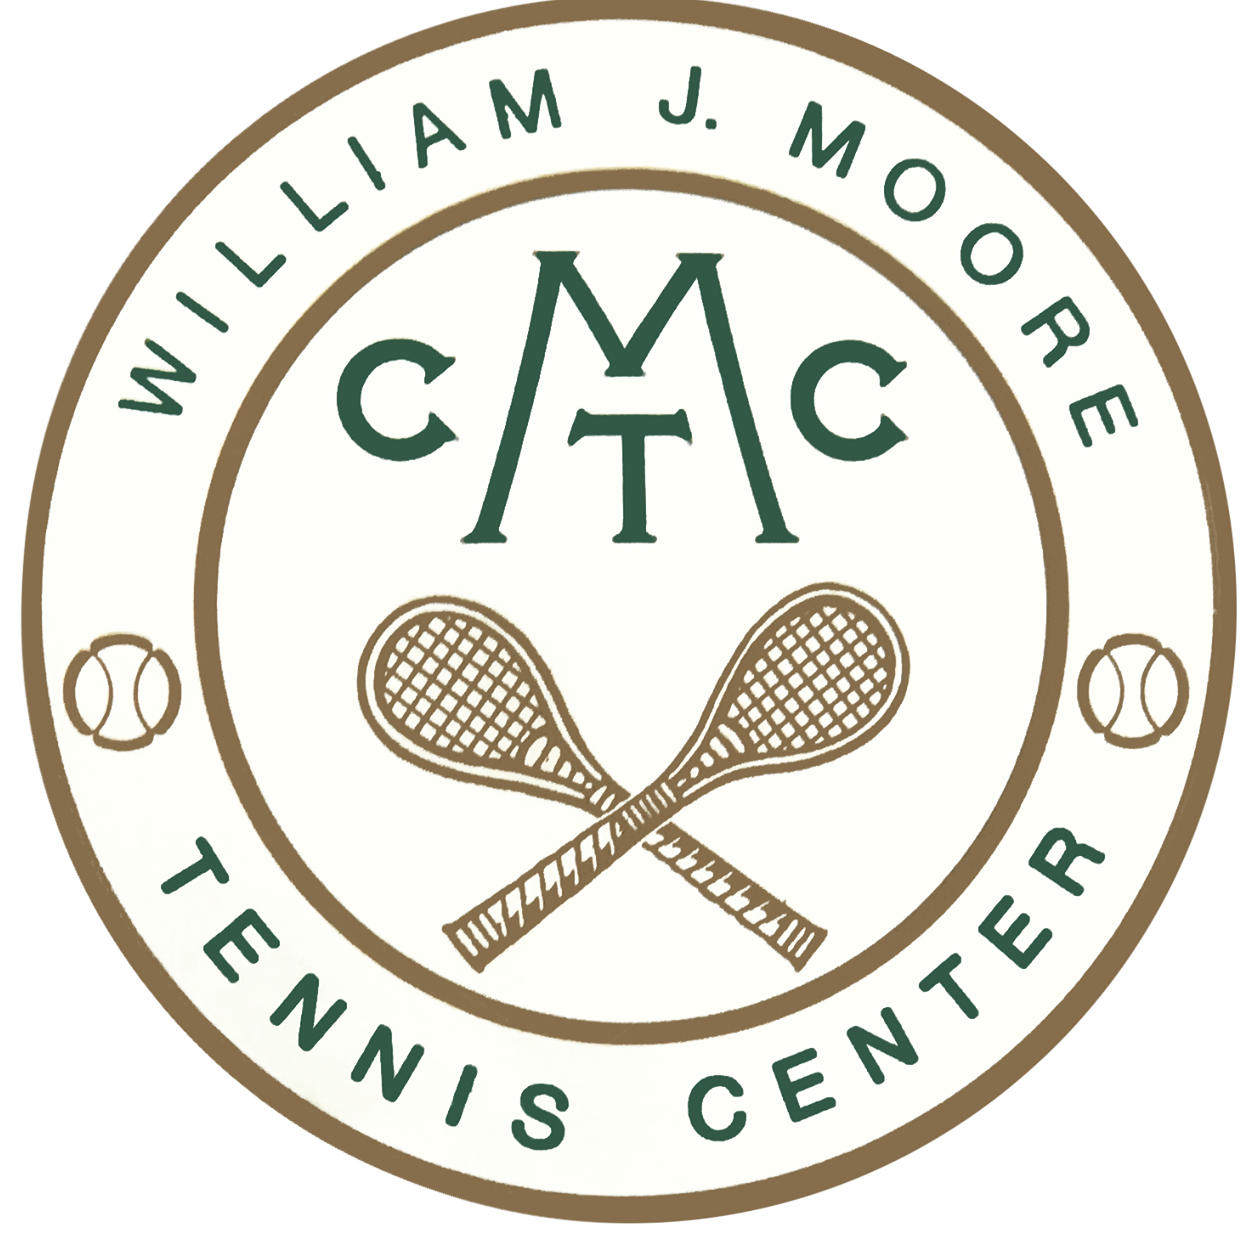 Cape May Tennis Center